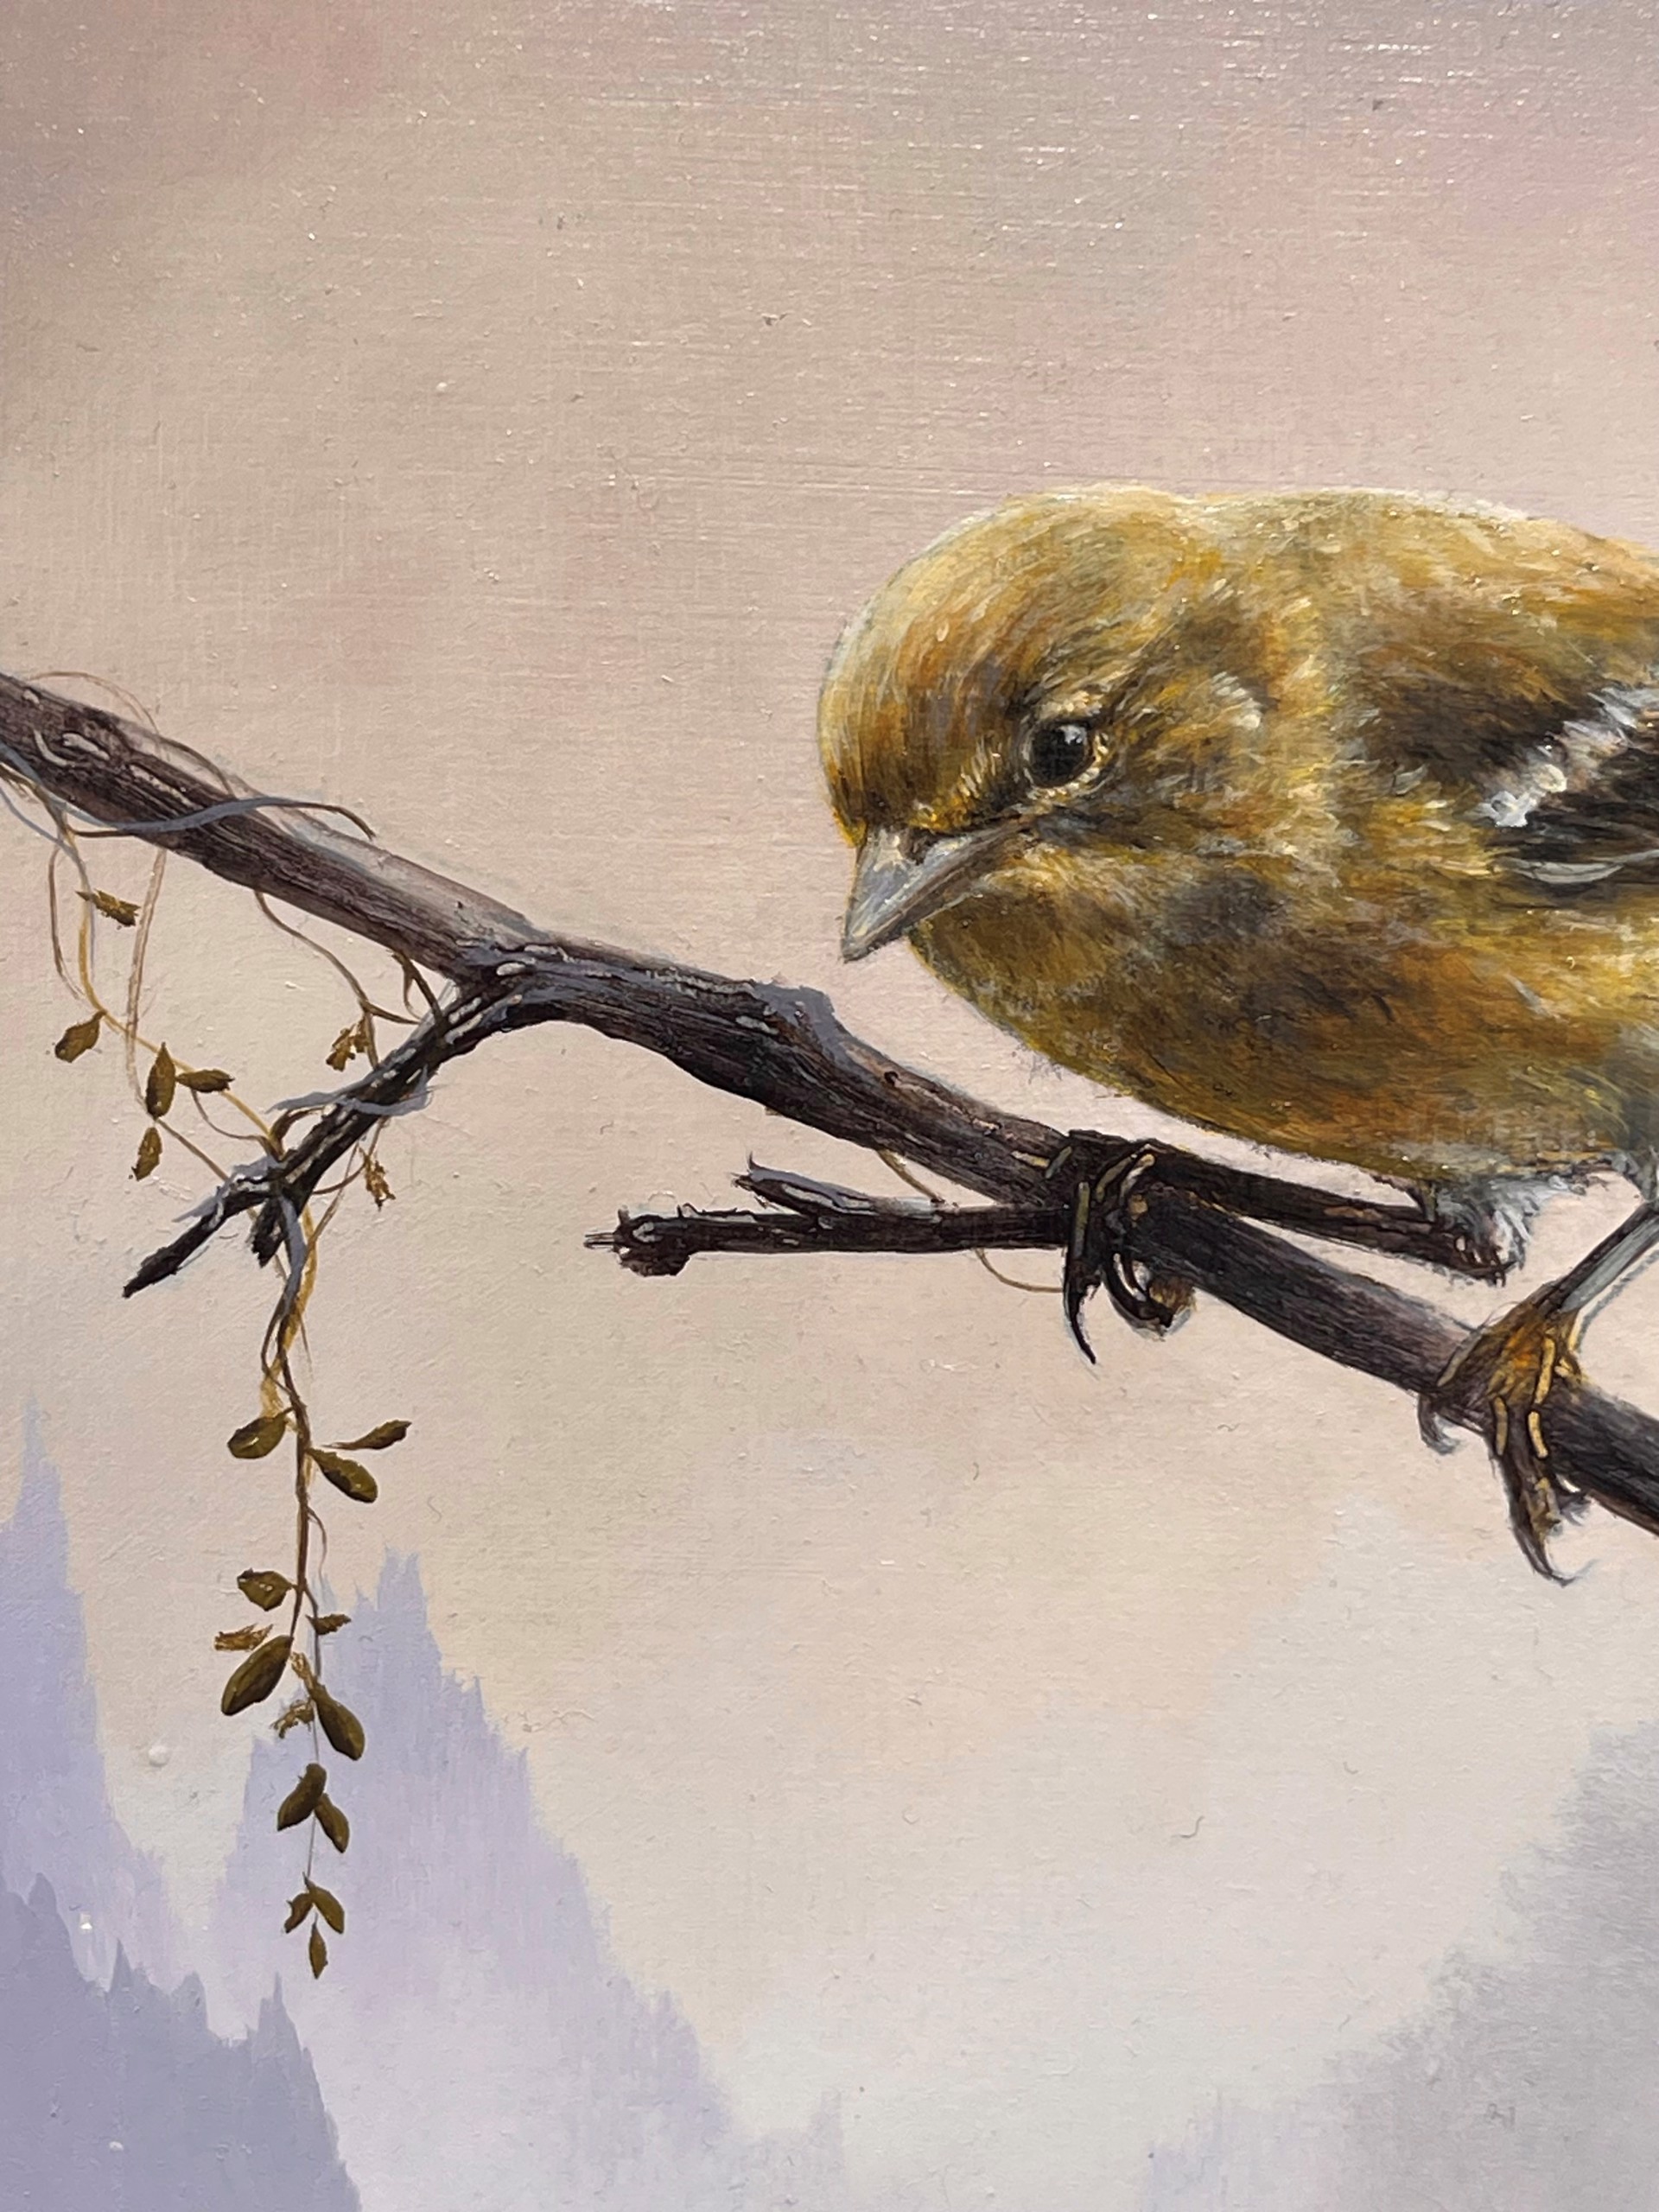 Pine Warbler Perched On A Twig by Brian Mashburn